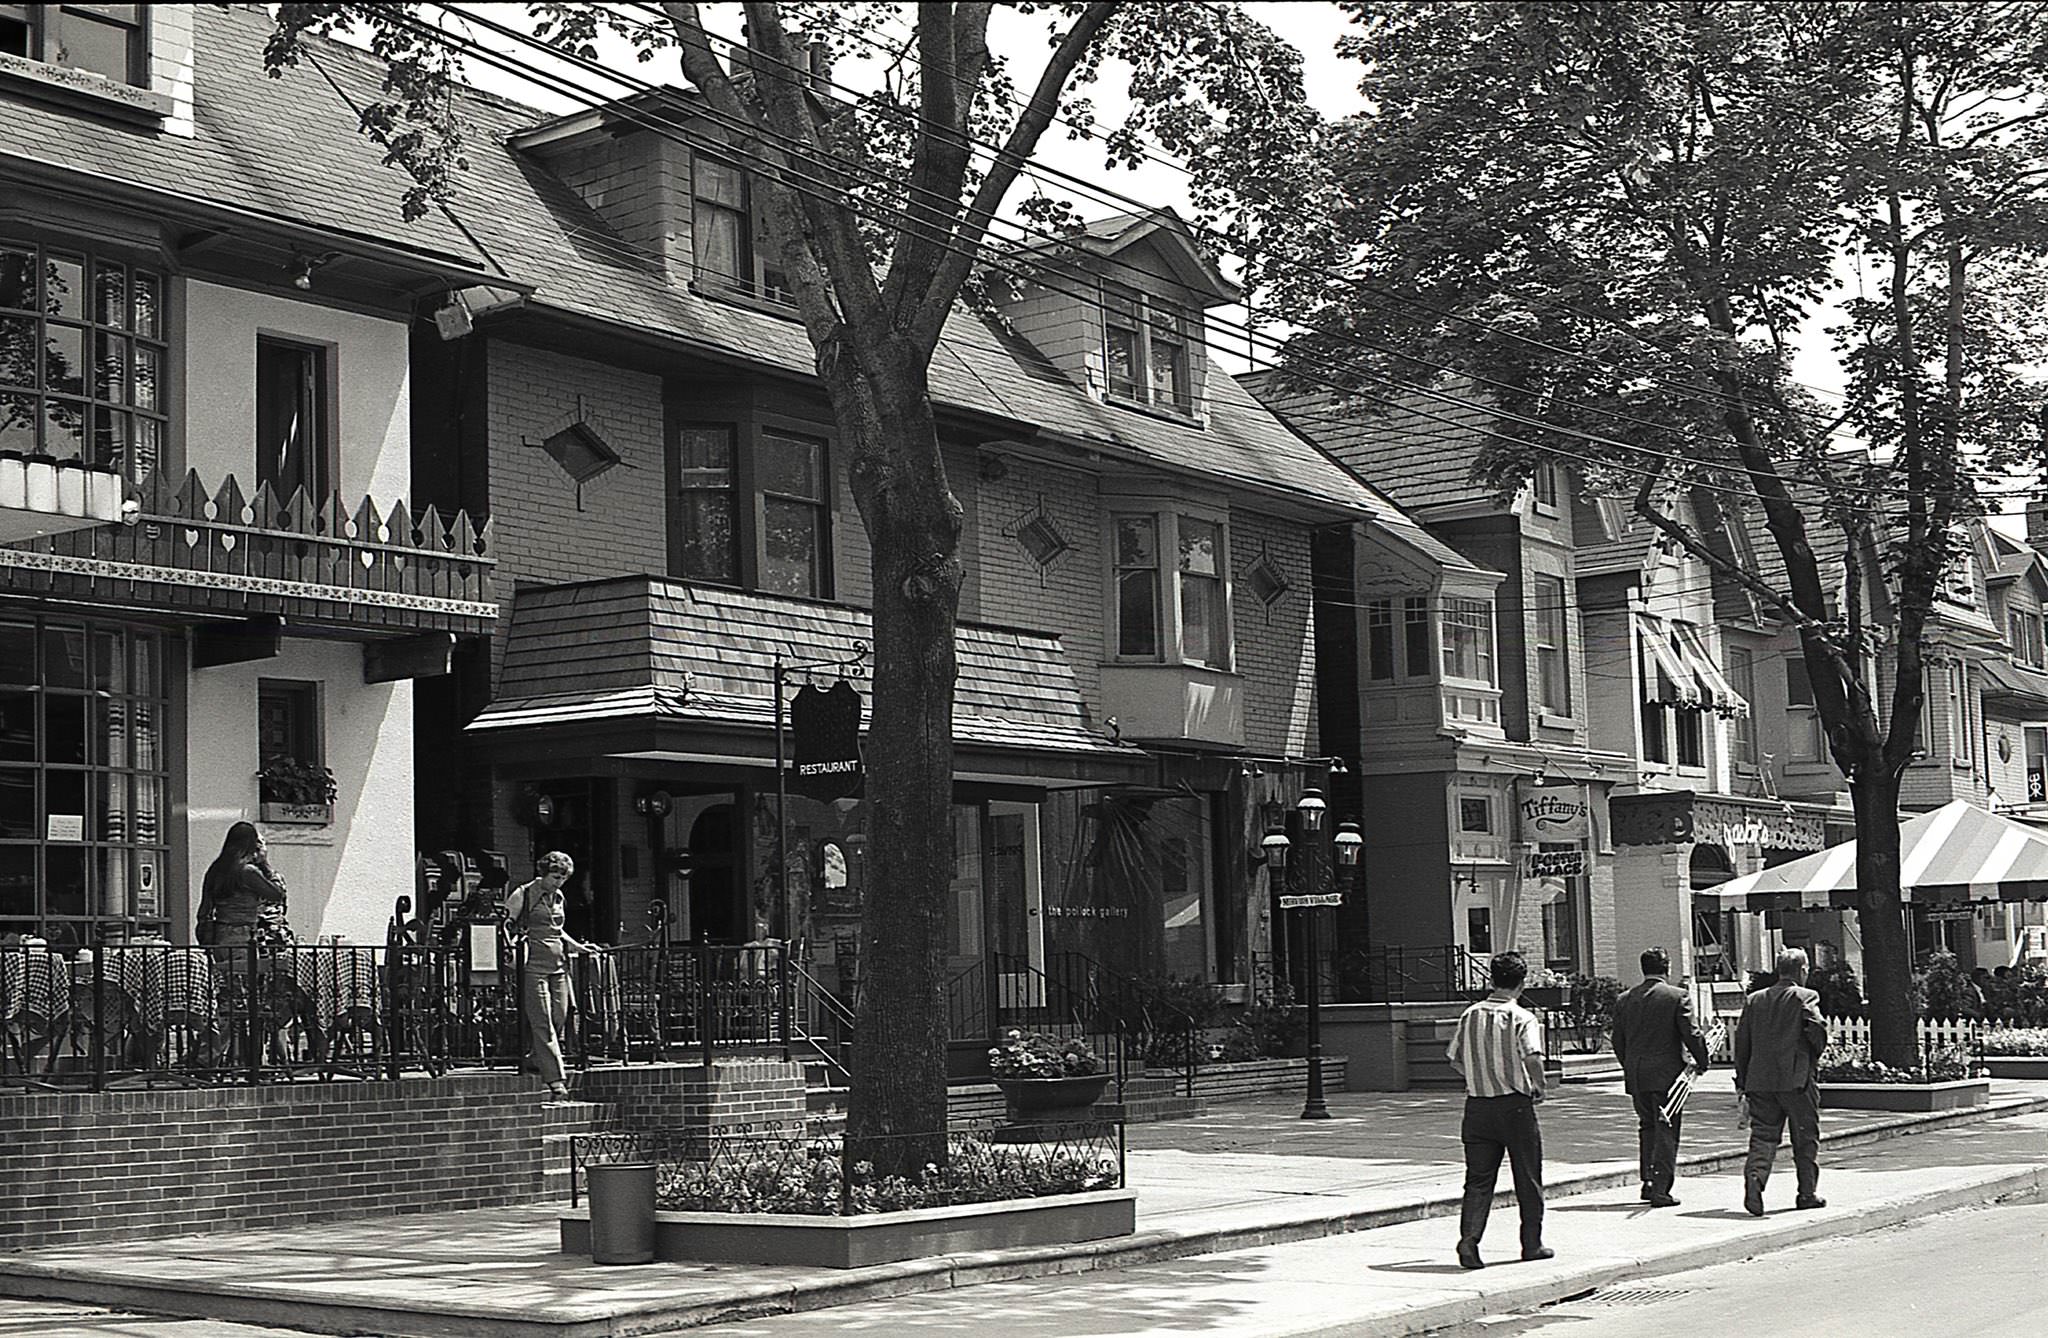 Mirvish Village, around 1970. Looking south along the east side of Markham Street. Gaston’s French Restaurant, Tiffany’s, Poster Palace, and the Pollock Gallery.